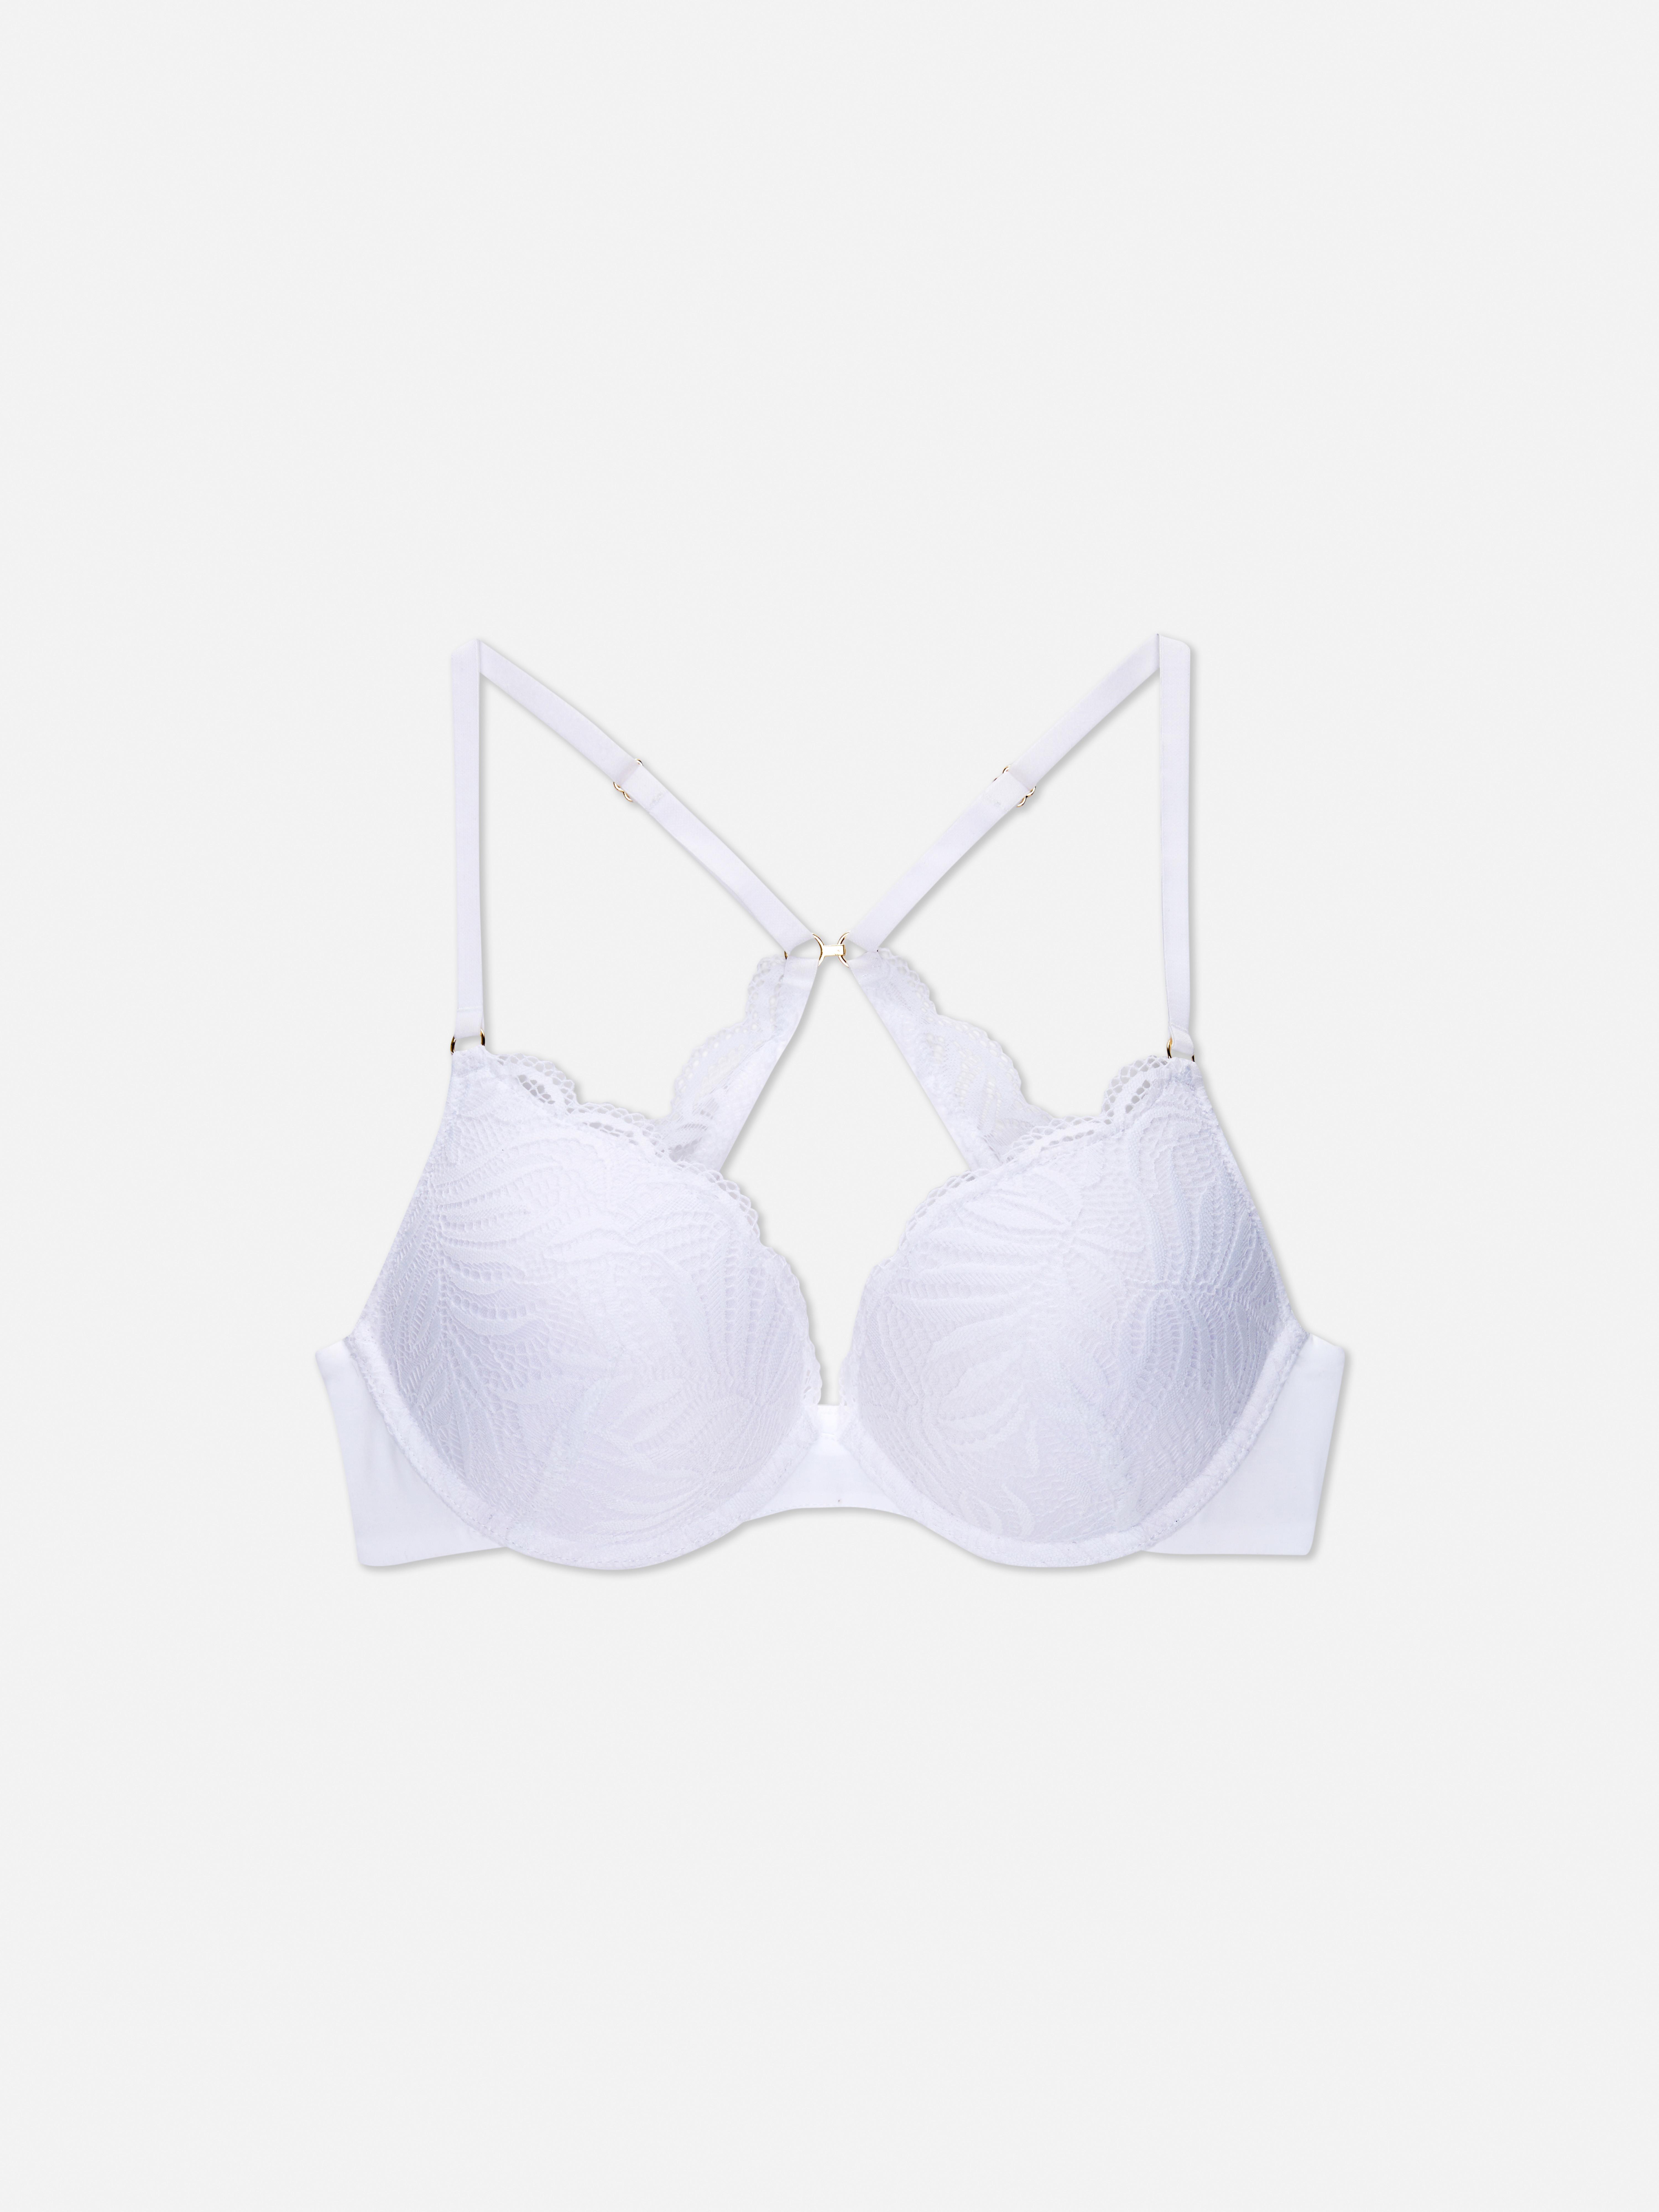 BNWT NEW PRIMARK 36D MAXIMISE boost 2 cup sizes push up bra white MULTIWAY  £25.95 - PicClick UK